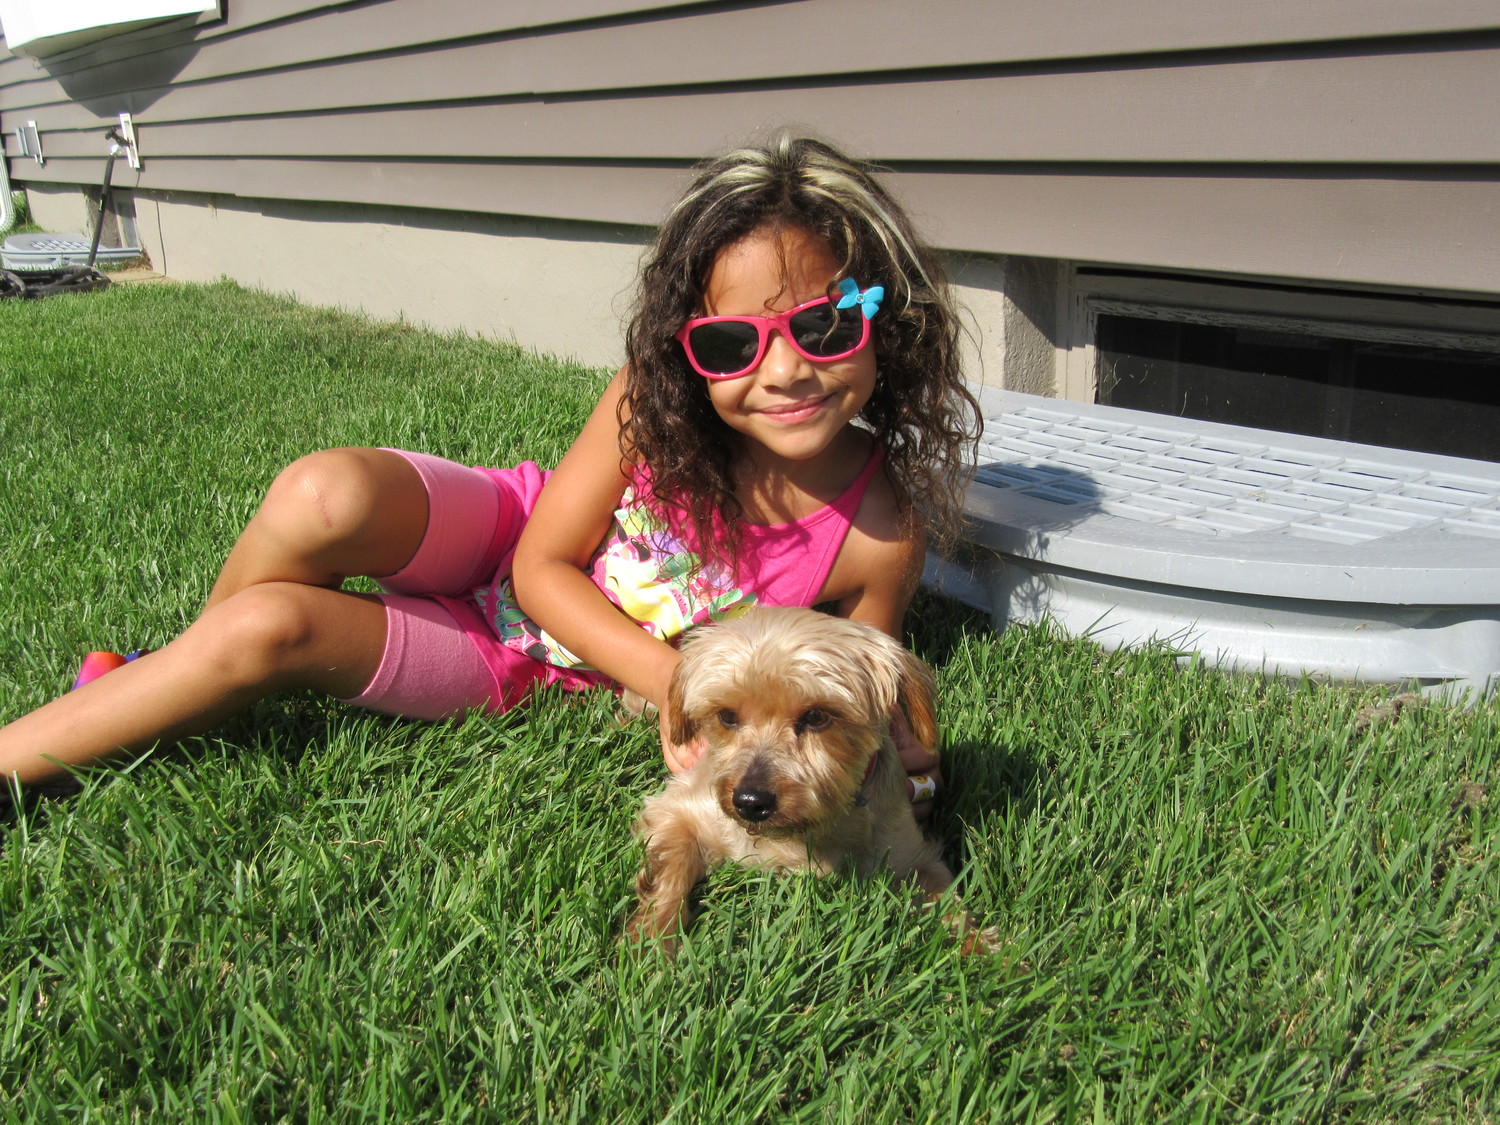 Lydia Toscano, 7, and her furry best friend, Venus, whom she adopted from local animal shelter Posh Pets Rescue, share a special bond: They were both adopted. Their unique story was chosen as a winner of the Petco Foundation’s annual Holiday Wishes campaign, which awards grants to animal welfare organizations like Posh Pets.